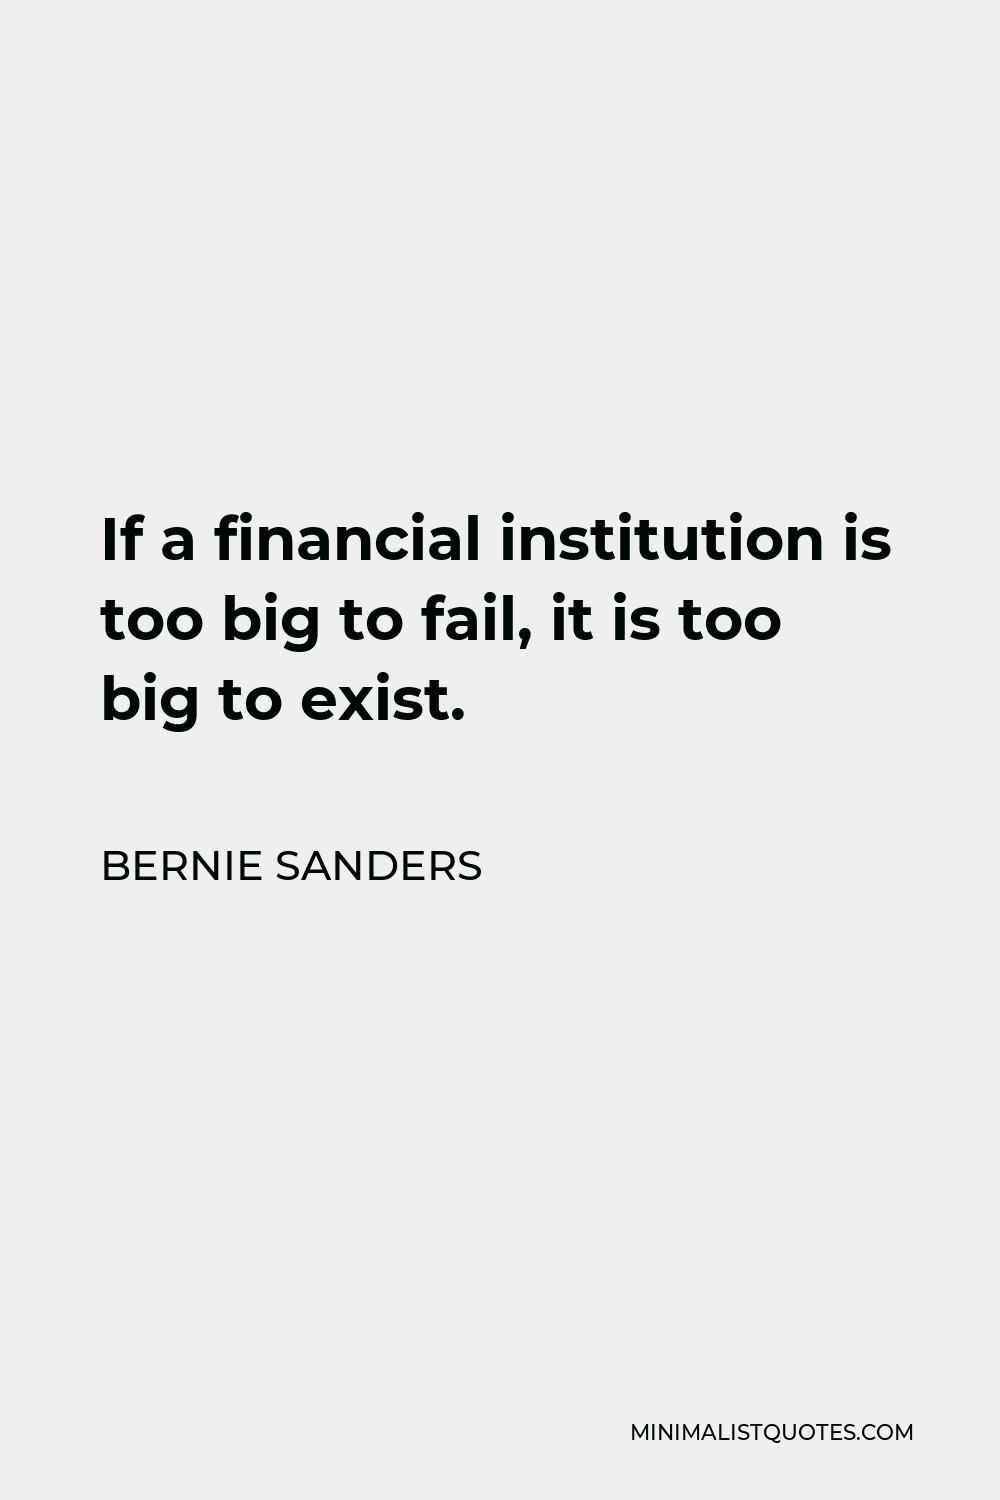 Bernie Sanders Quote - If a financial institution is too big to fail, it is too big to exist.